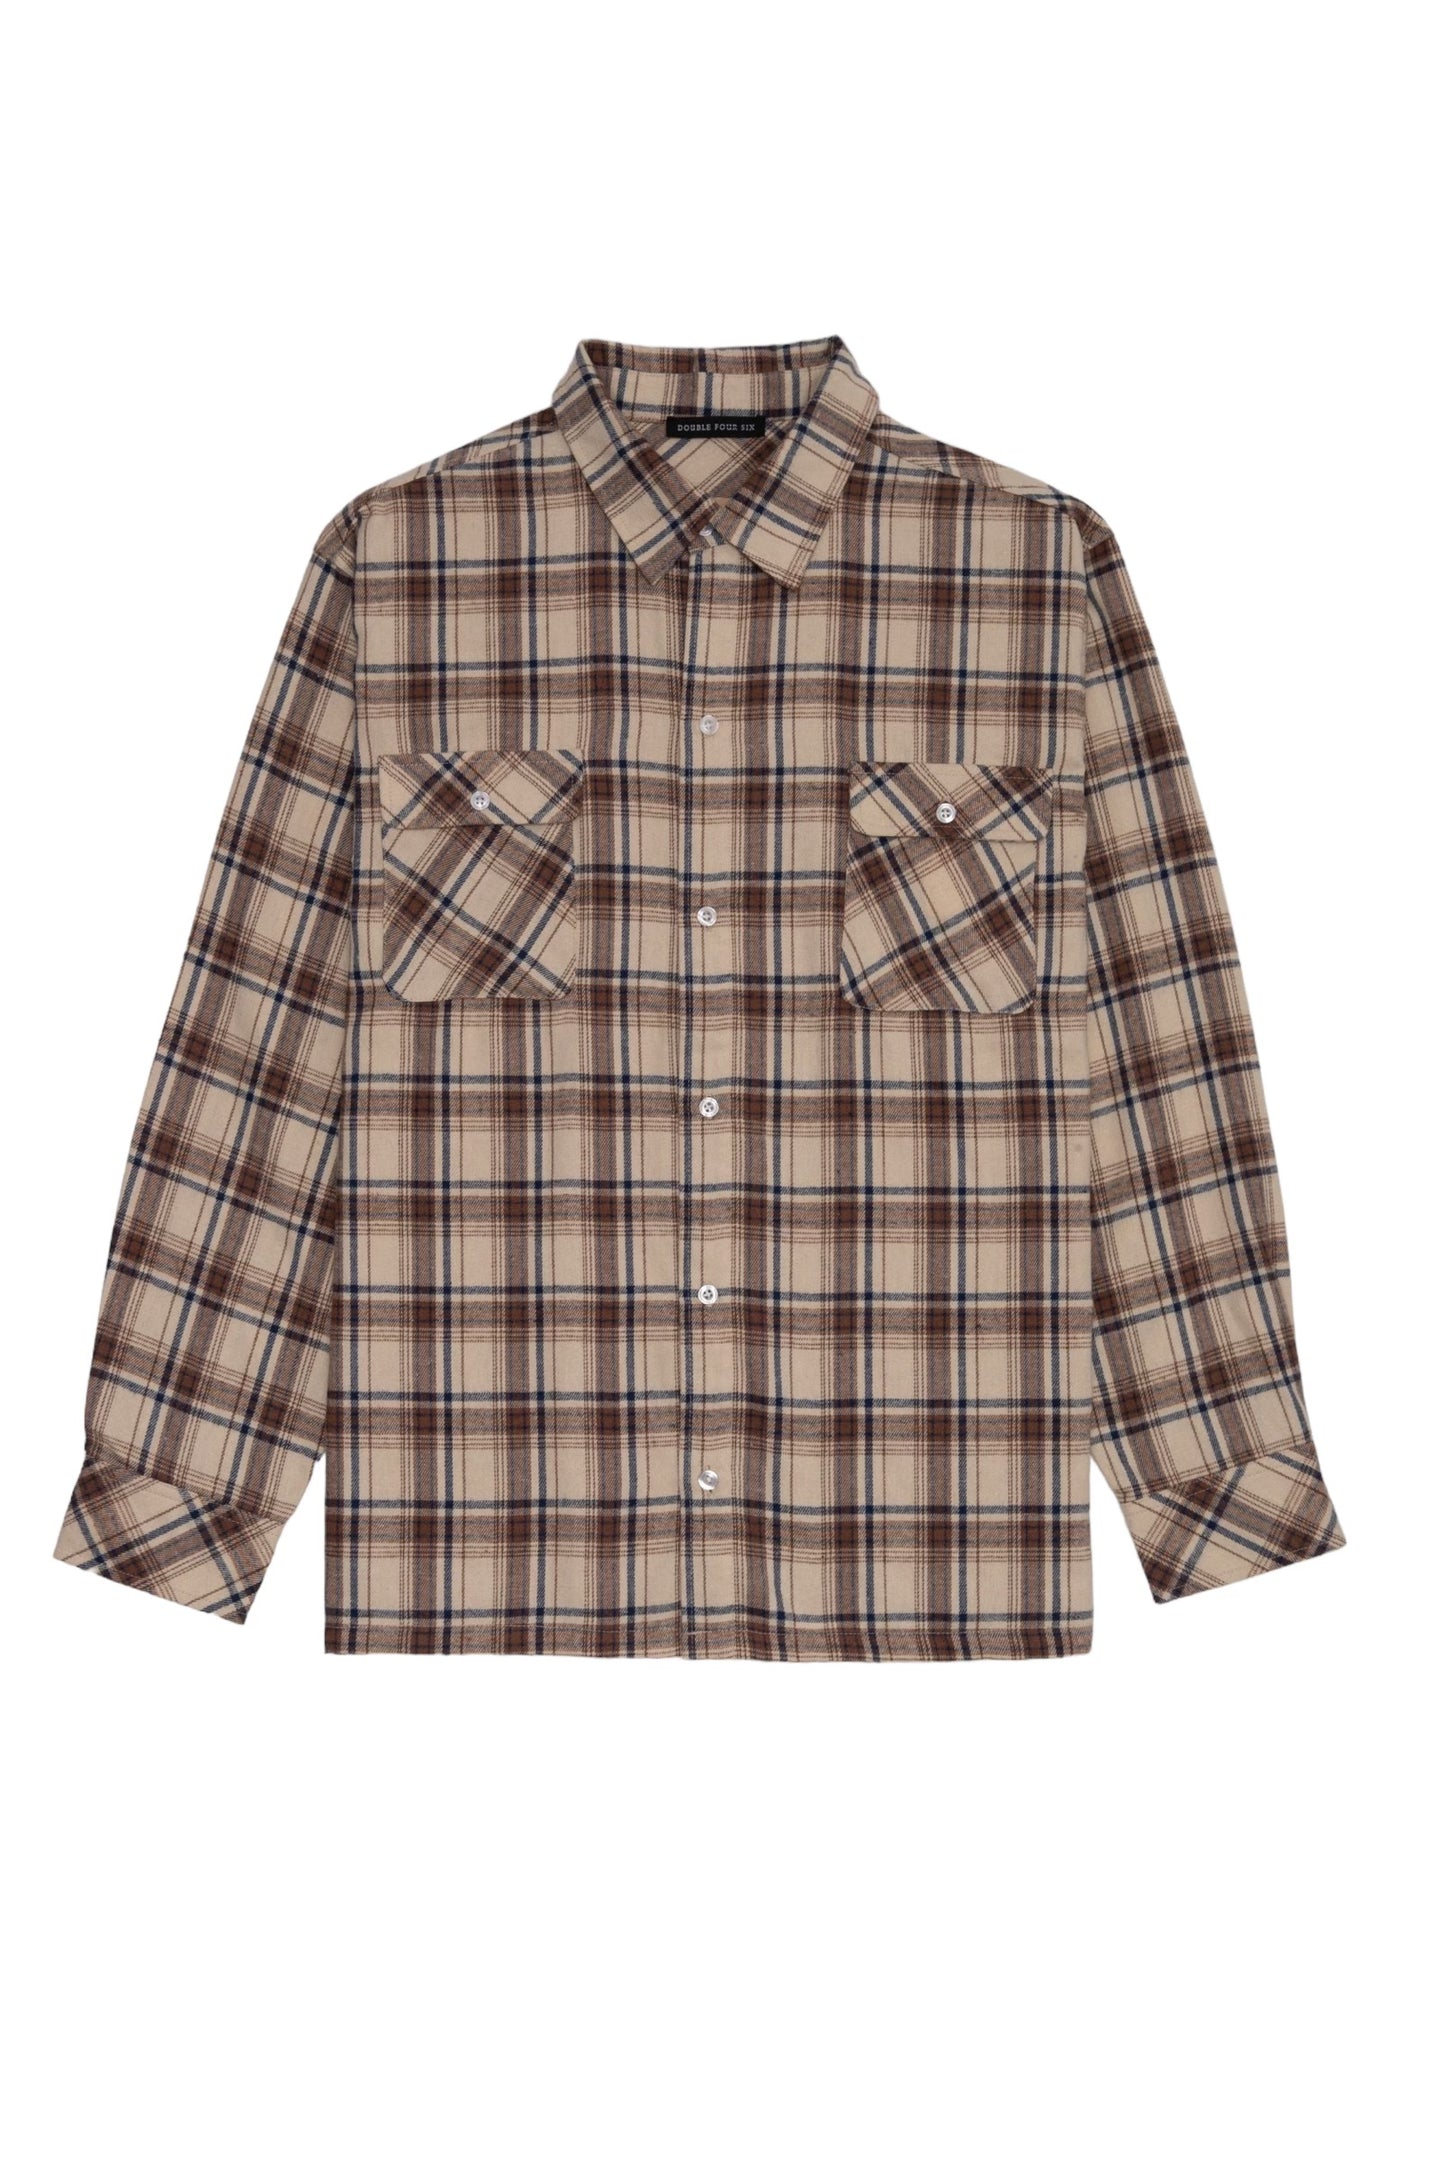 DOUBLE FOUR SIX- Back Logo Checked Shirt Beige Check